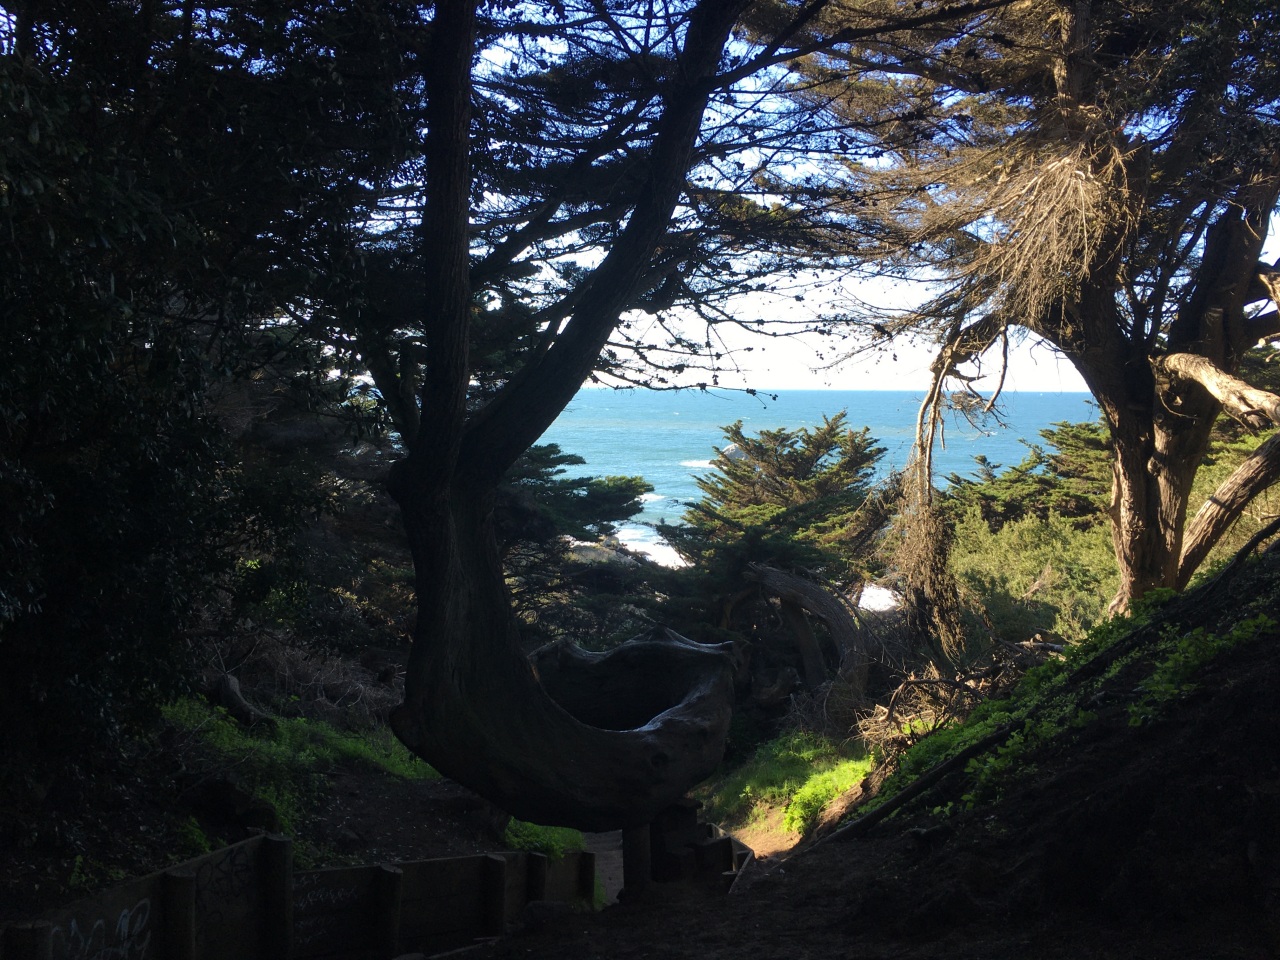 Expect to Descend (and Climb Back Up) Steep Stairs to Mile Rock Beach, Land's End